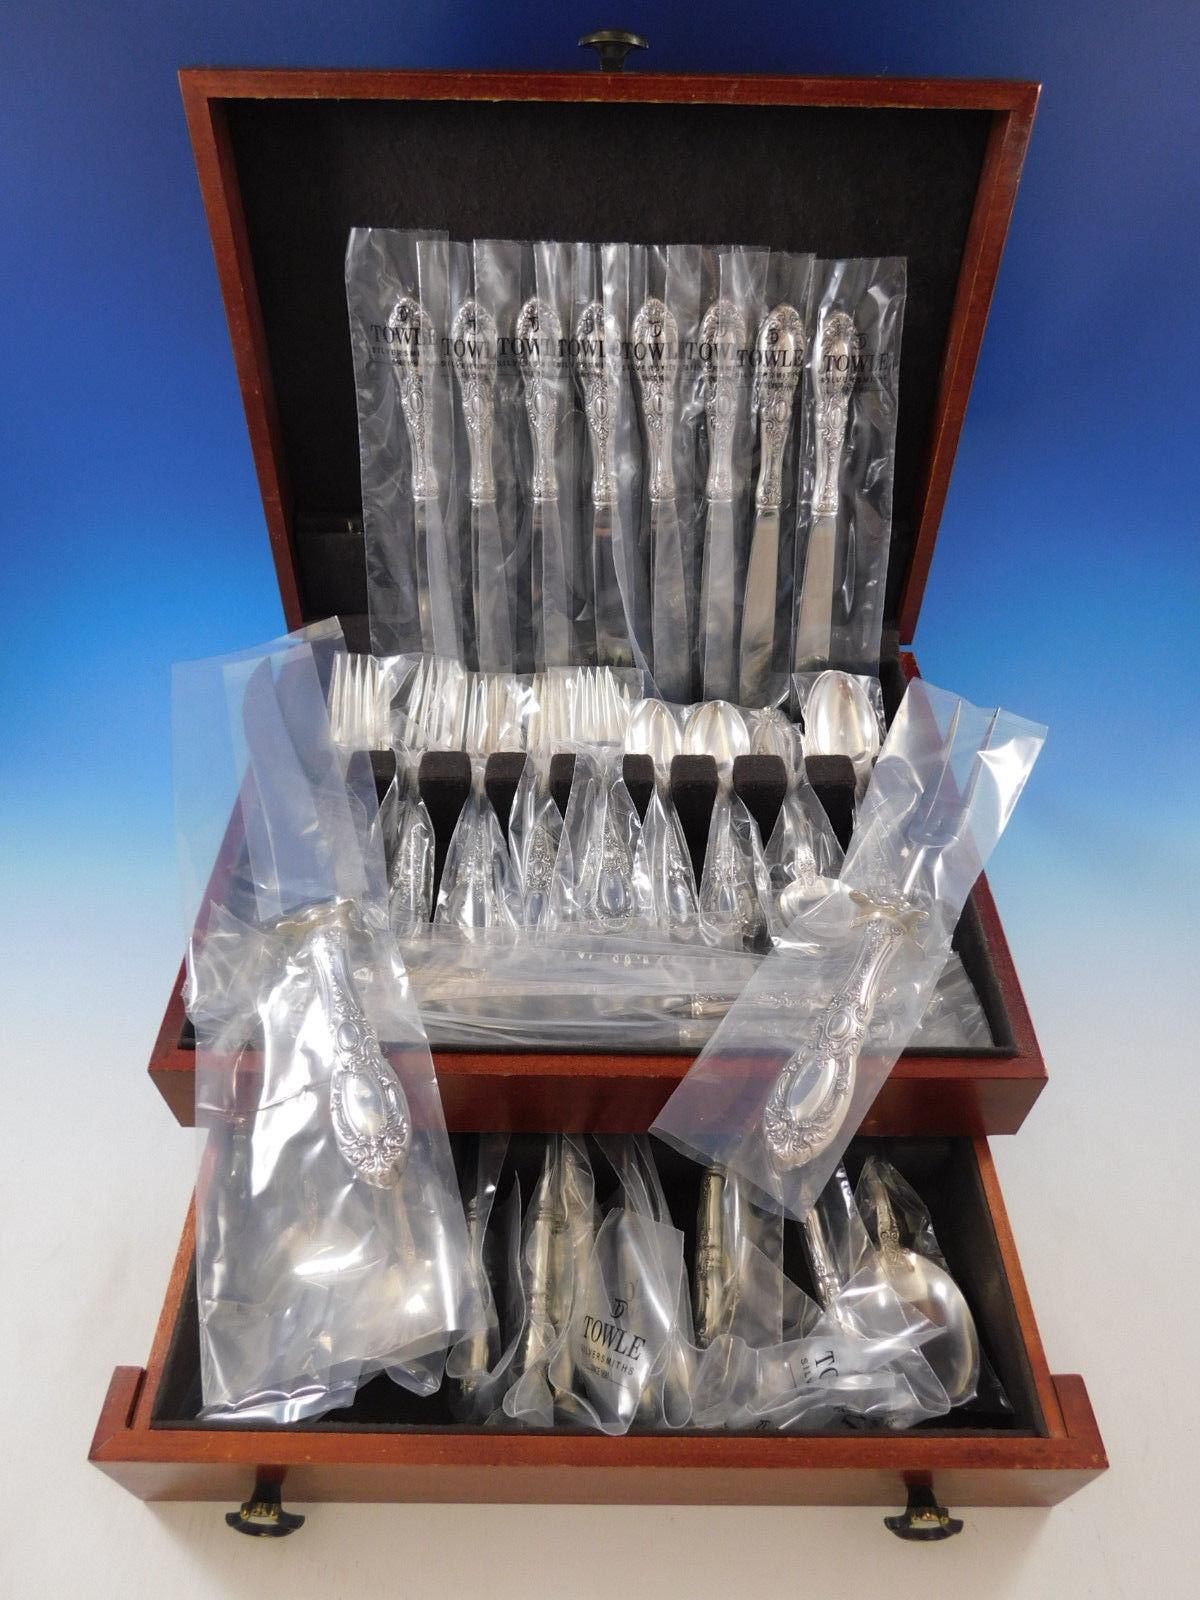 New, unused King Richard by Towle sterling silver flatware set - 70 pieces. This set includes:

Eight dinner size knives, 9 5/8